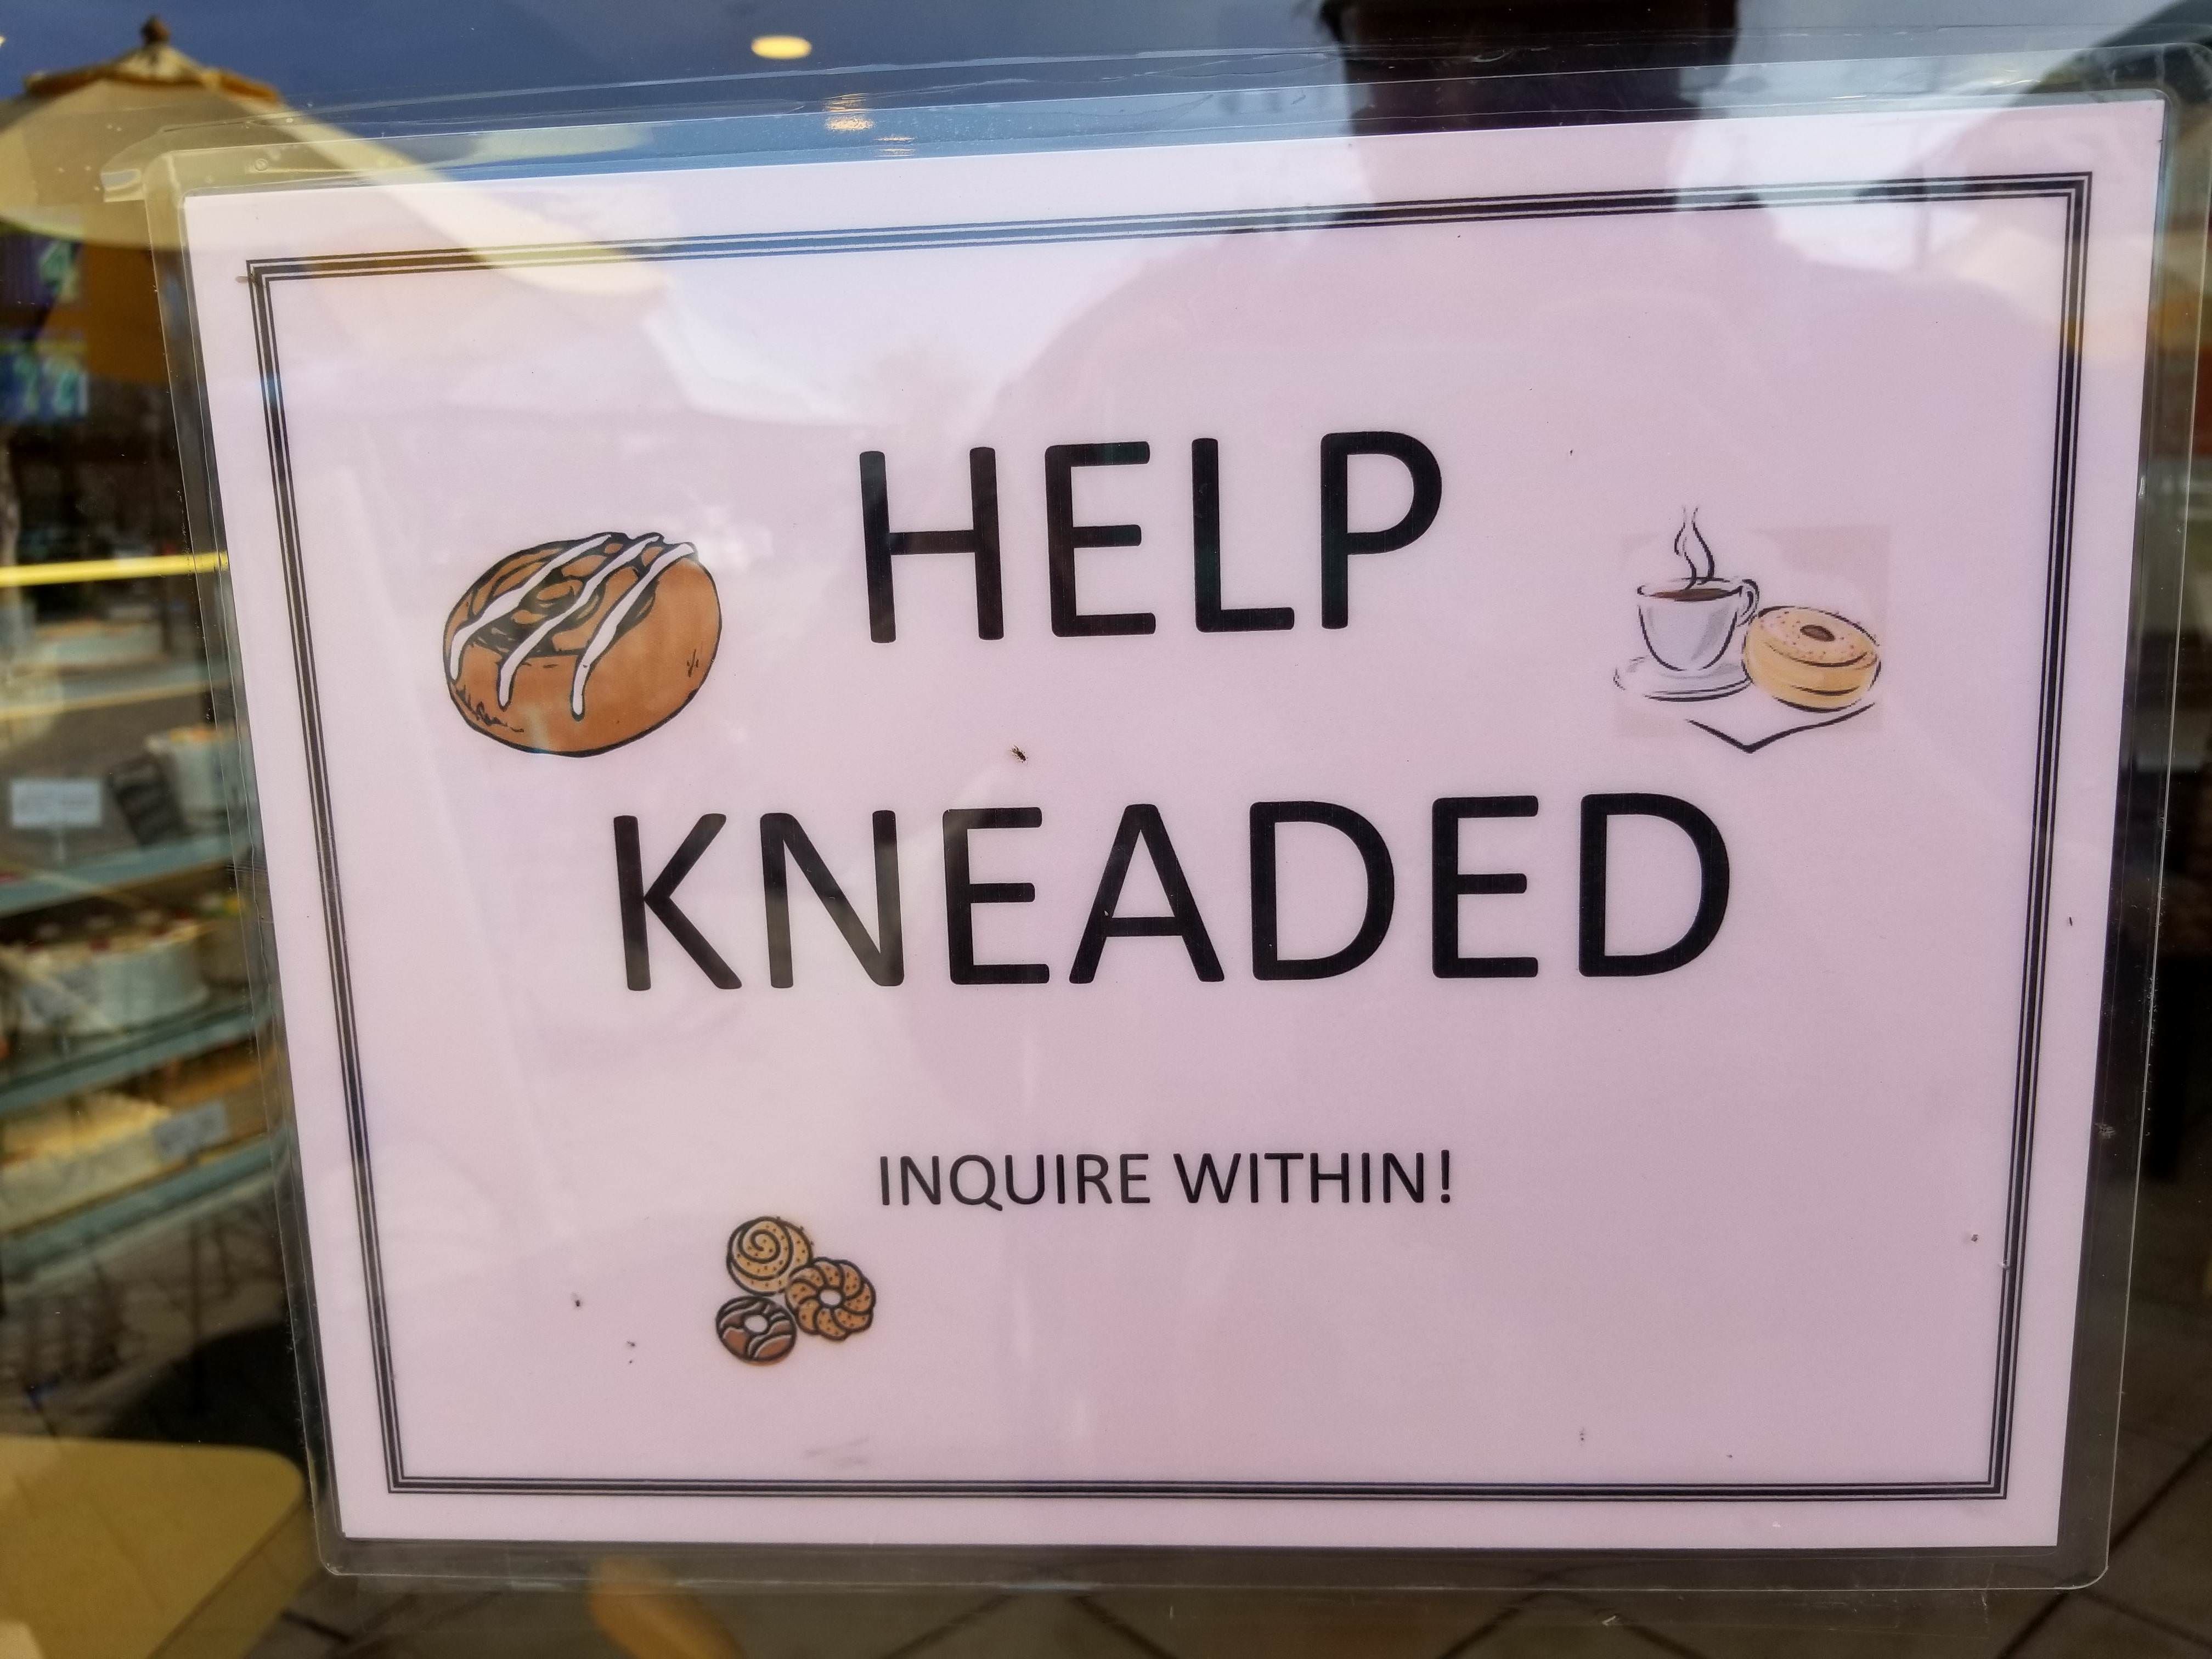 They really raised the bar with this help wanted sign